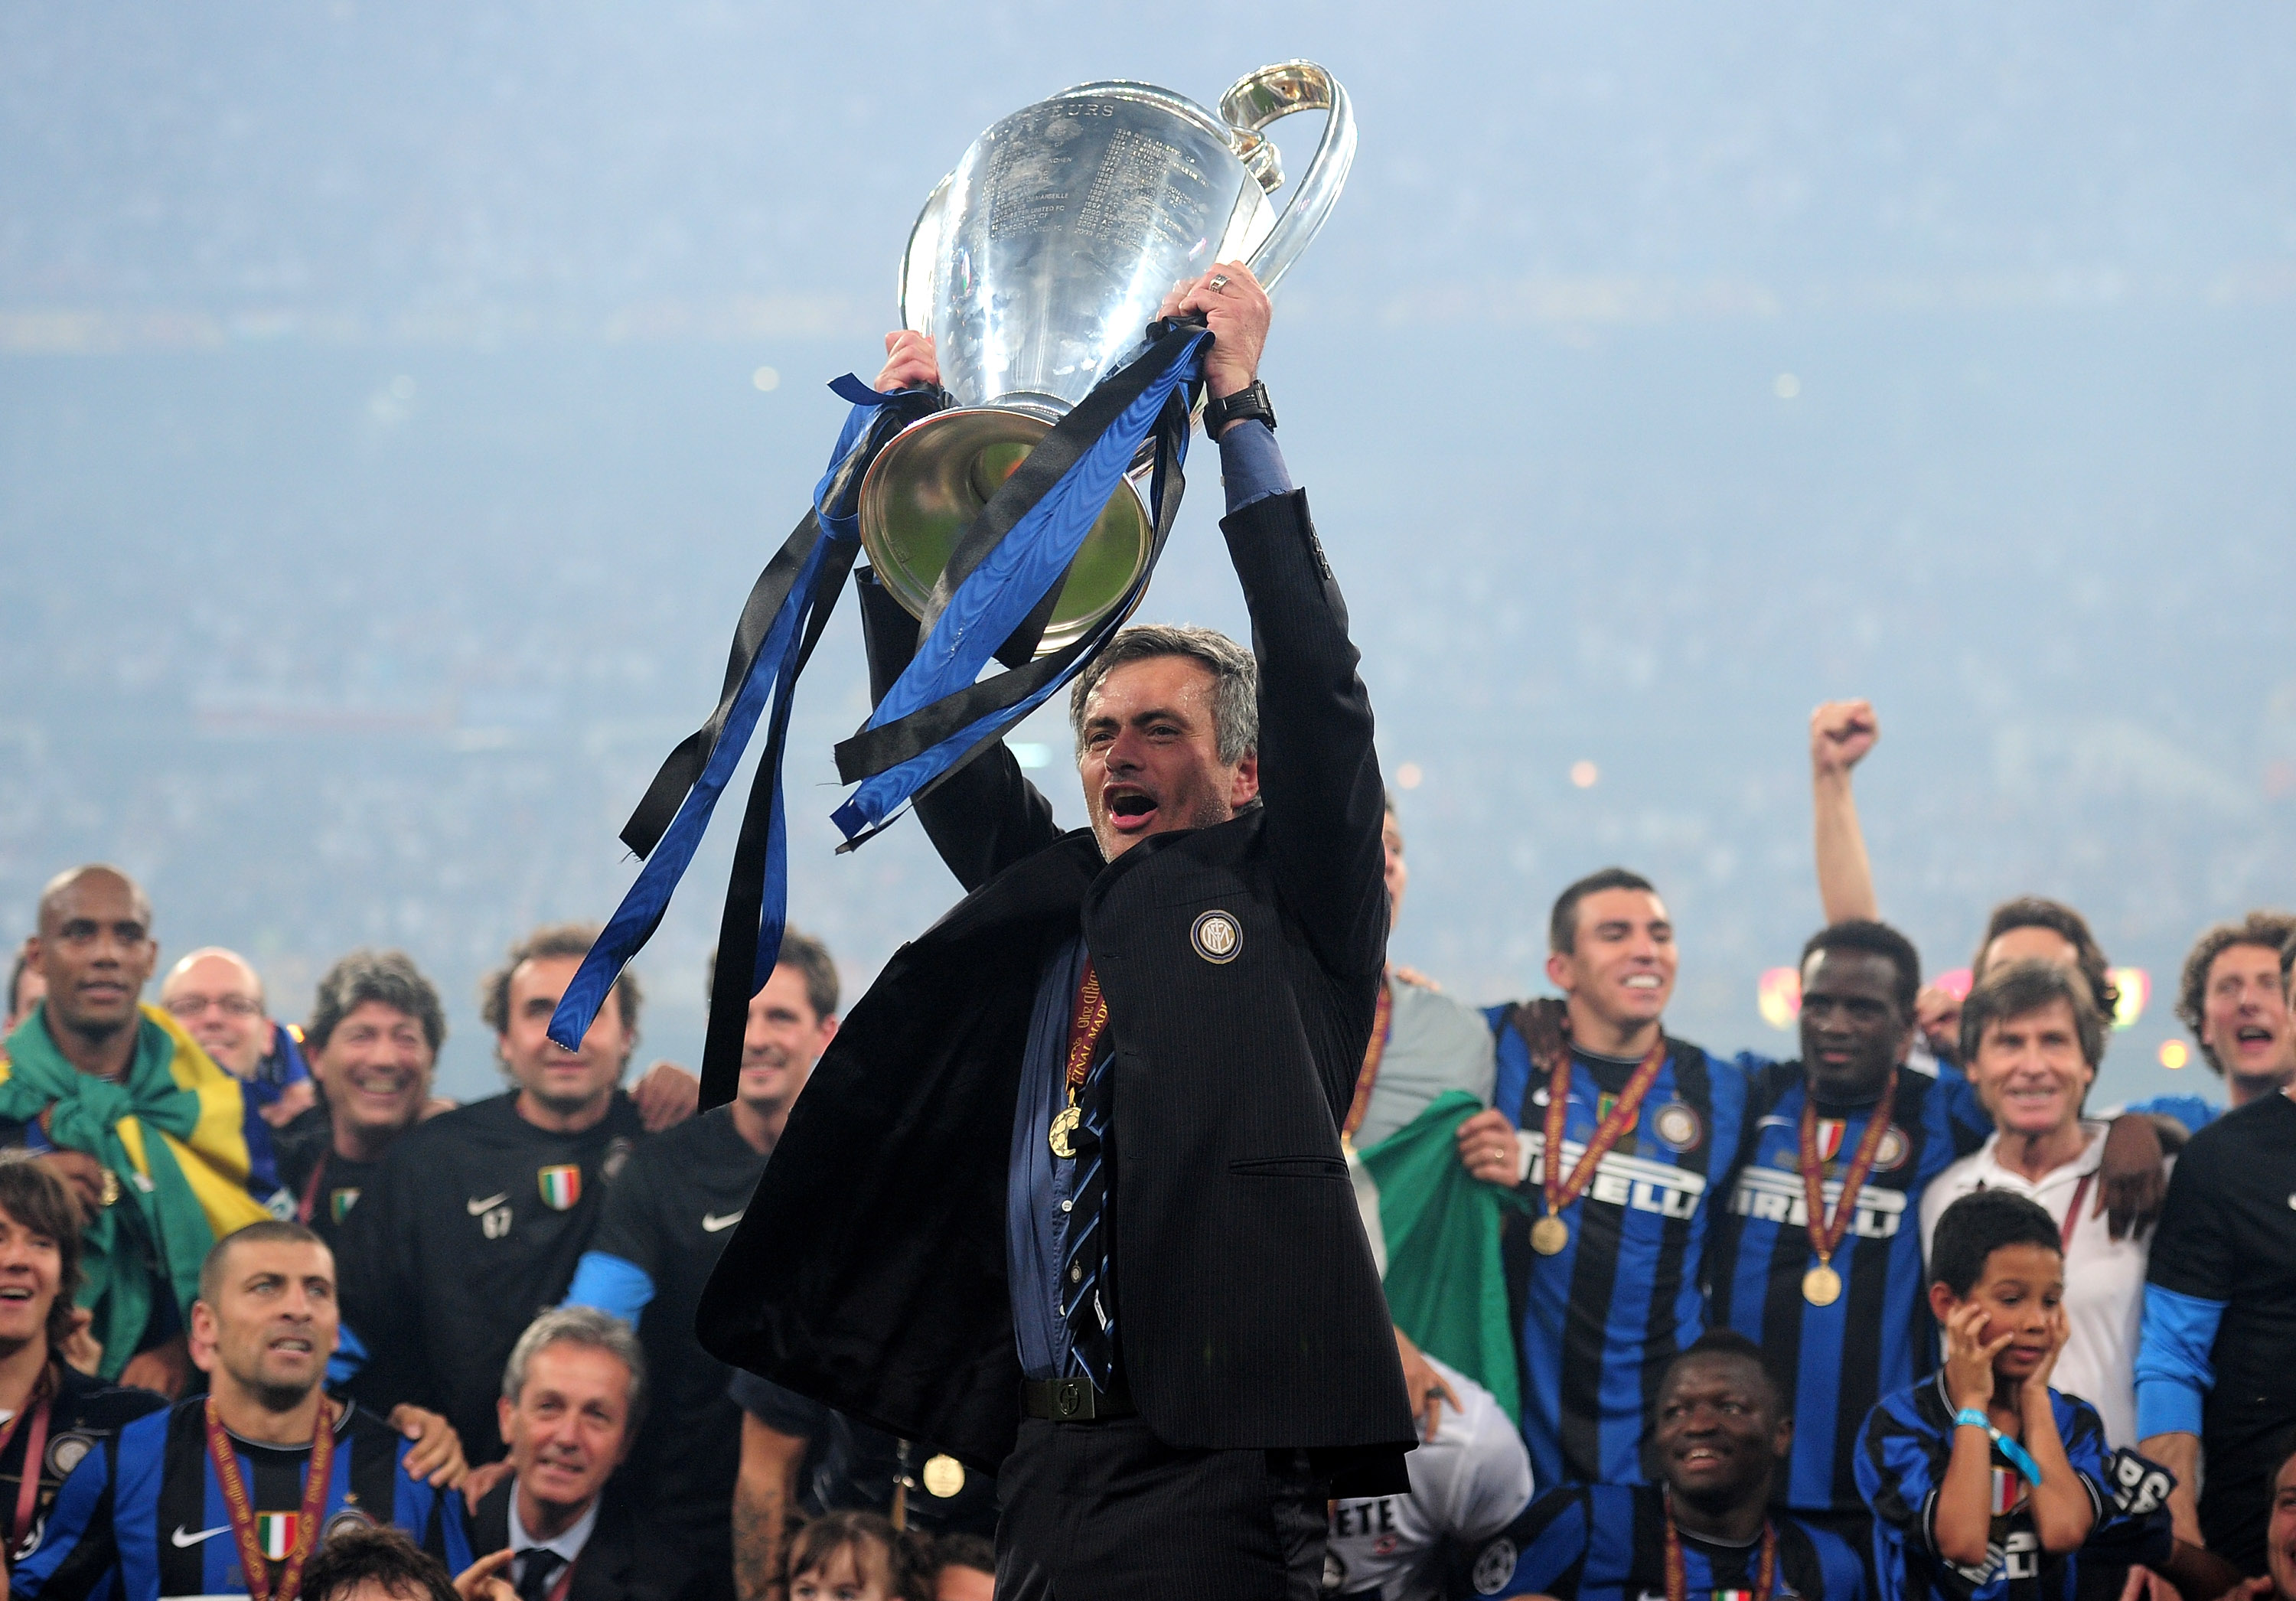 MADRID, SPAIN - MAY 22:  Jose Mourinho the Inter Milan coach holds the trophy aloft after winning the UEFA Champions League Final match between FC Bayern Muenchen and Inter Milan at the Estadio Santiago Bernabeu on May 22, 2010 in Madrid, Spain.  (Photo b